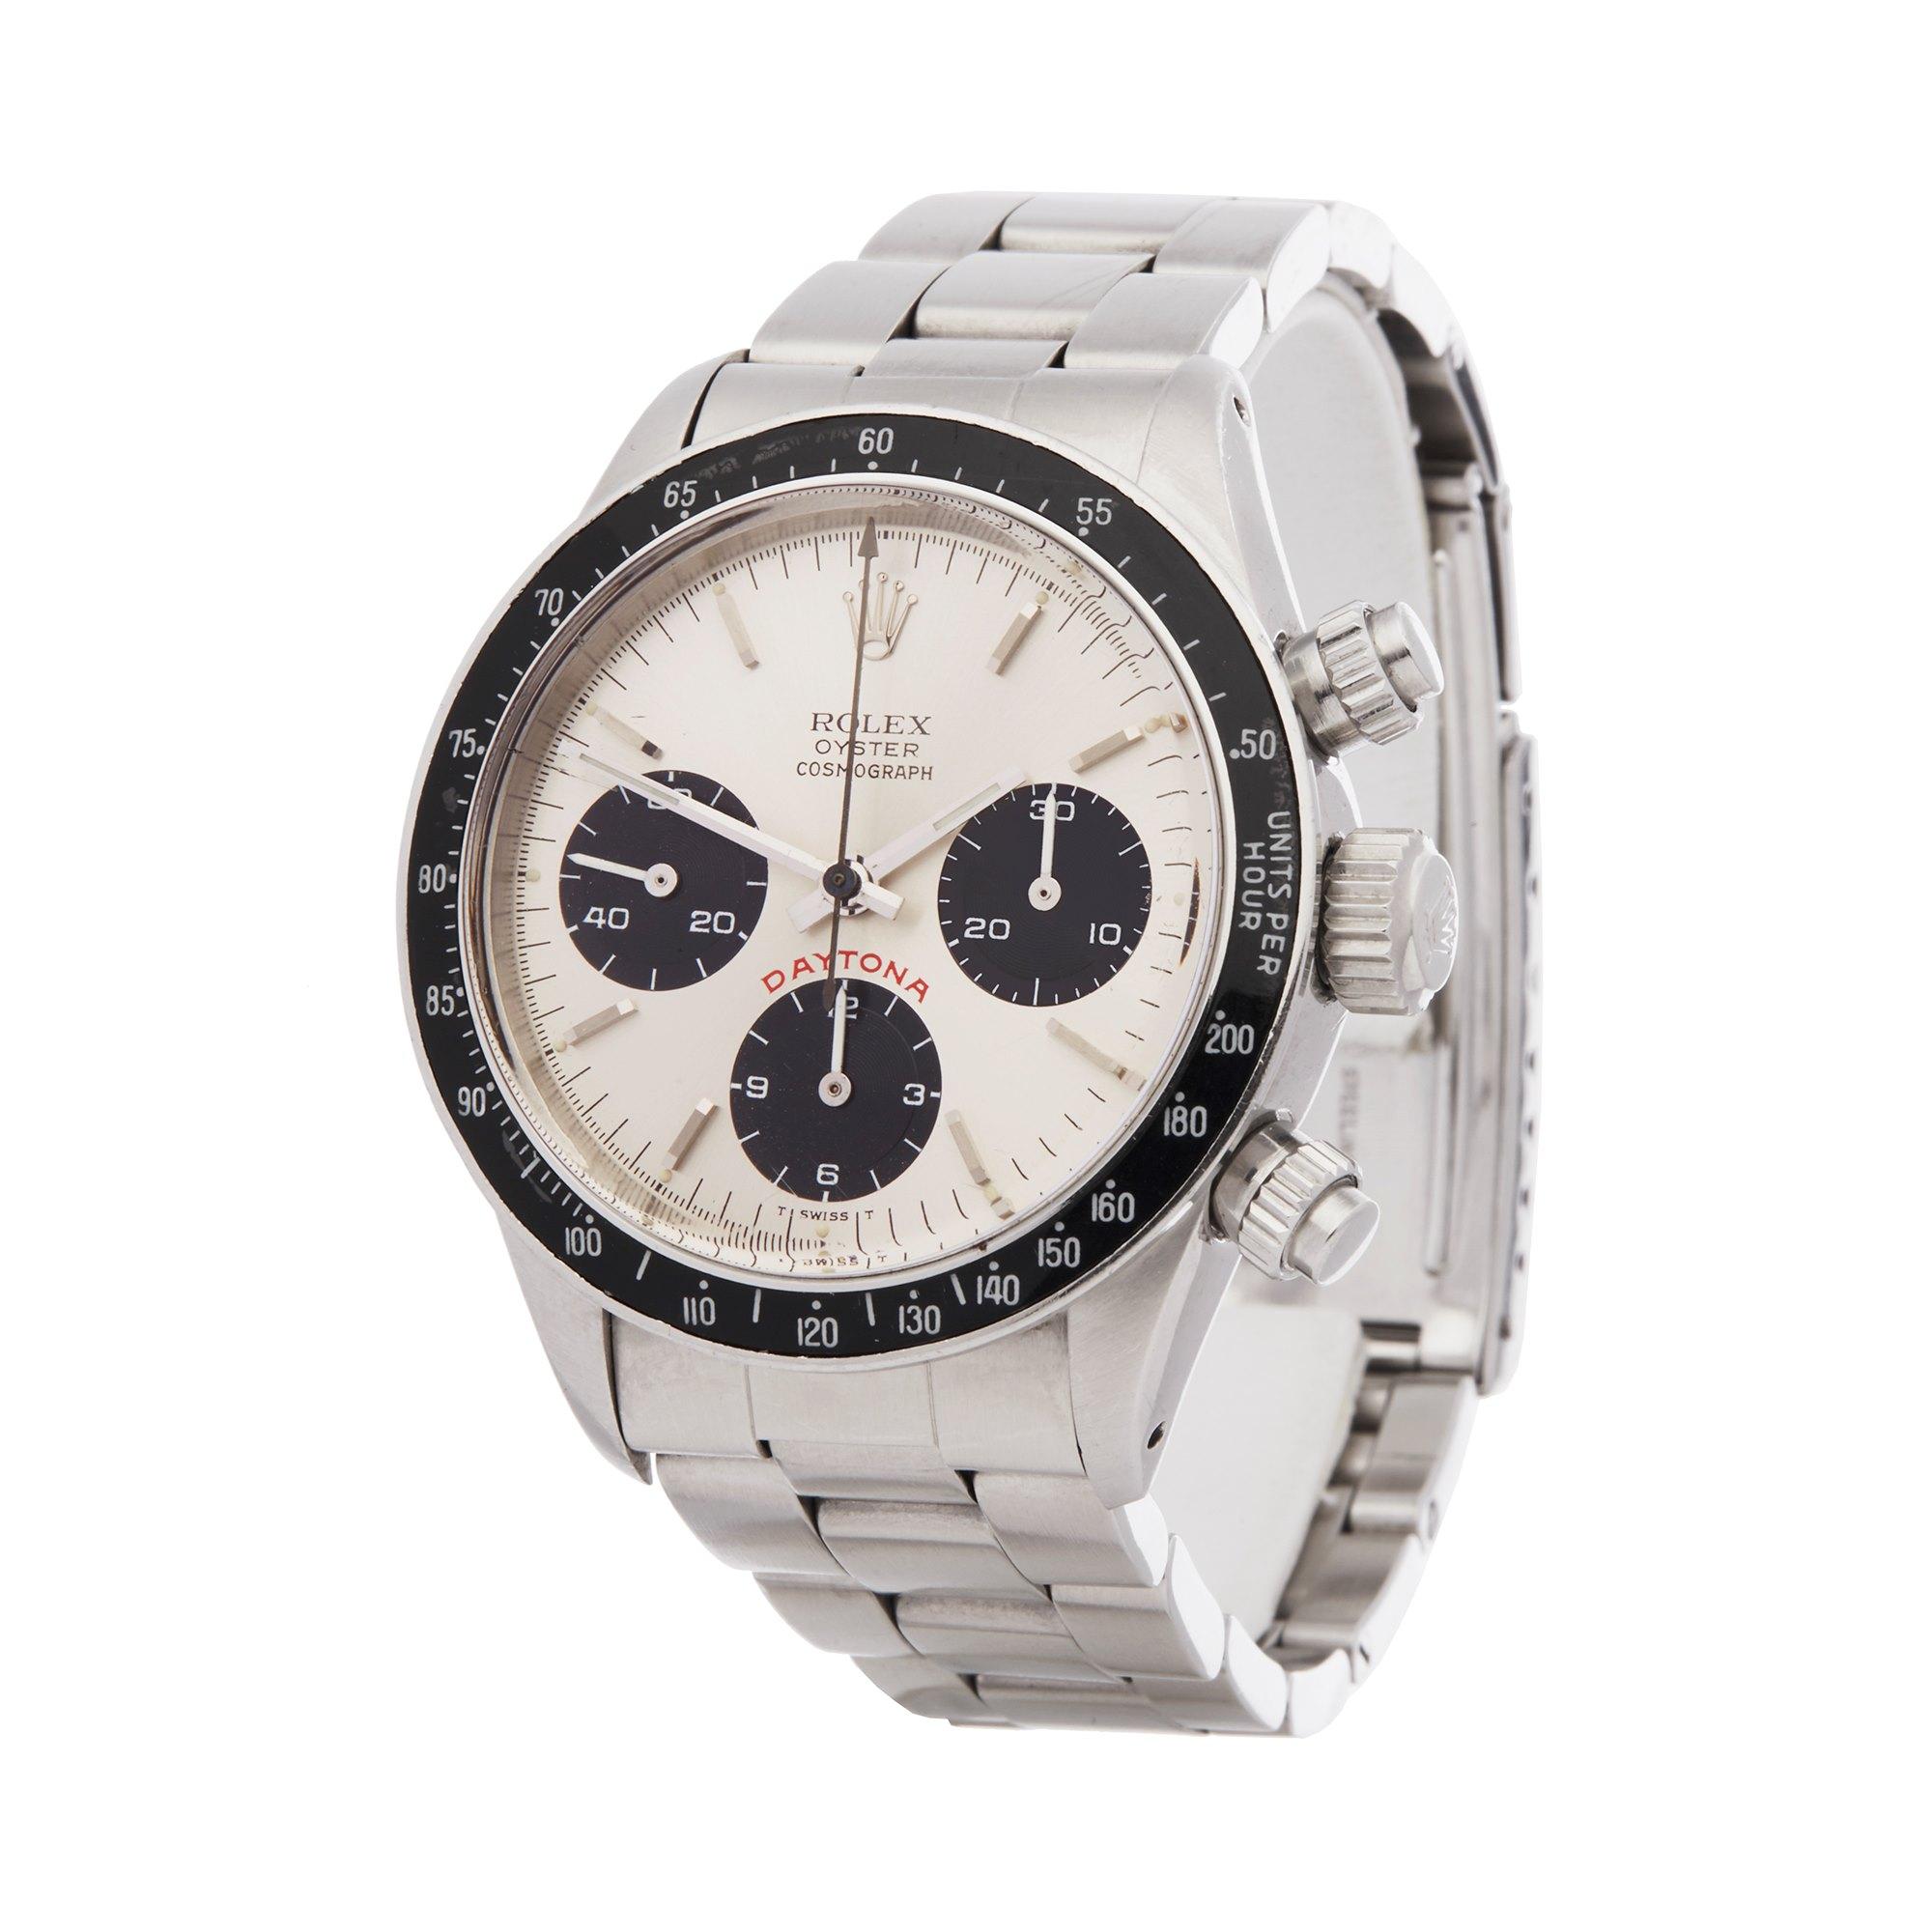 Xupes Reference: COM002403
Manufacturer: Rolex
Model: Daytona
Model Variant: 
Model Number: 6263
Age: 1978
Gender: Men's
Complete With: Xupes Presentation Box 
Dial: Silver Baton
Glass: Plexiglass
Case Material: Stainless Steel
Strap Material: